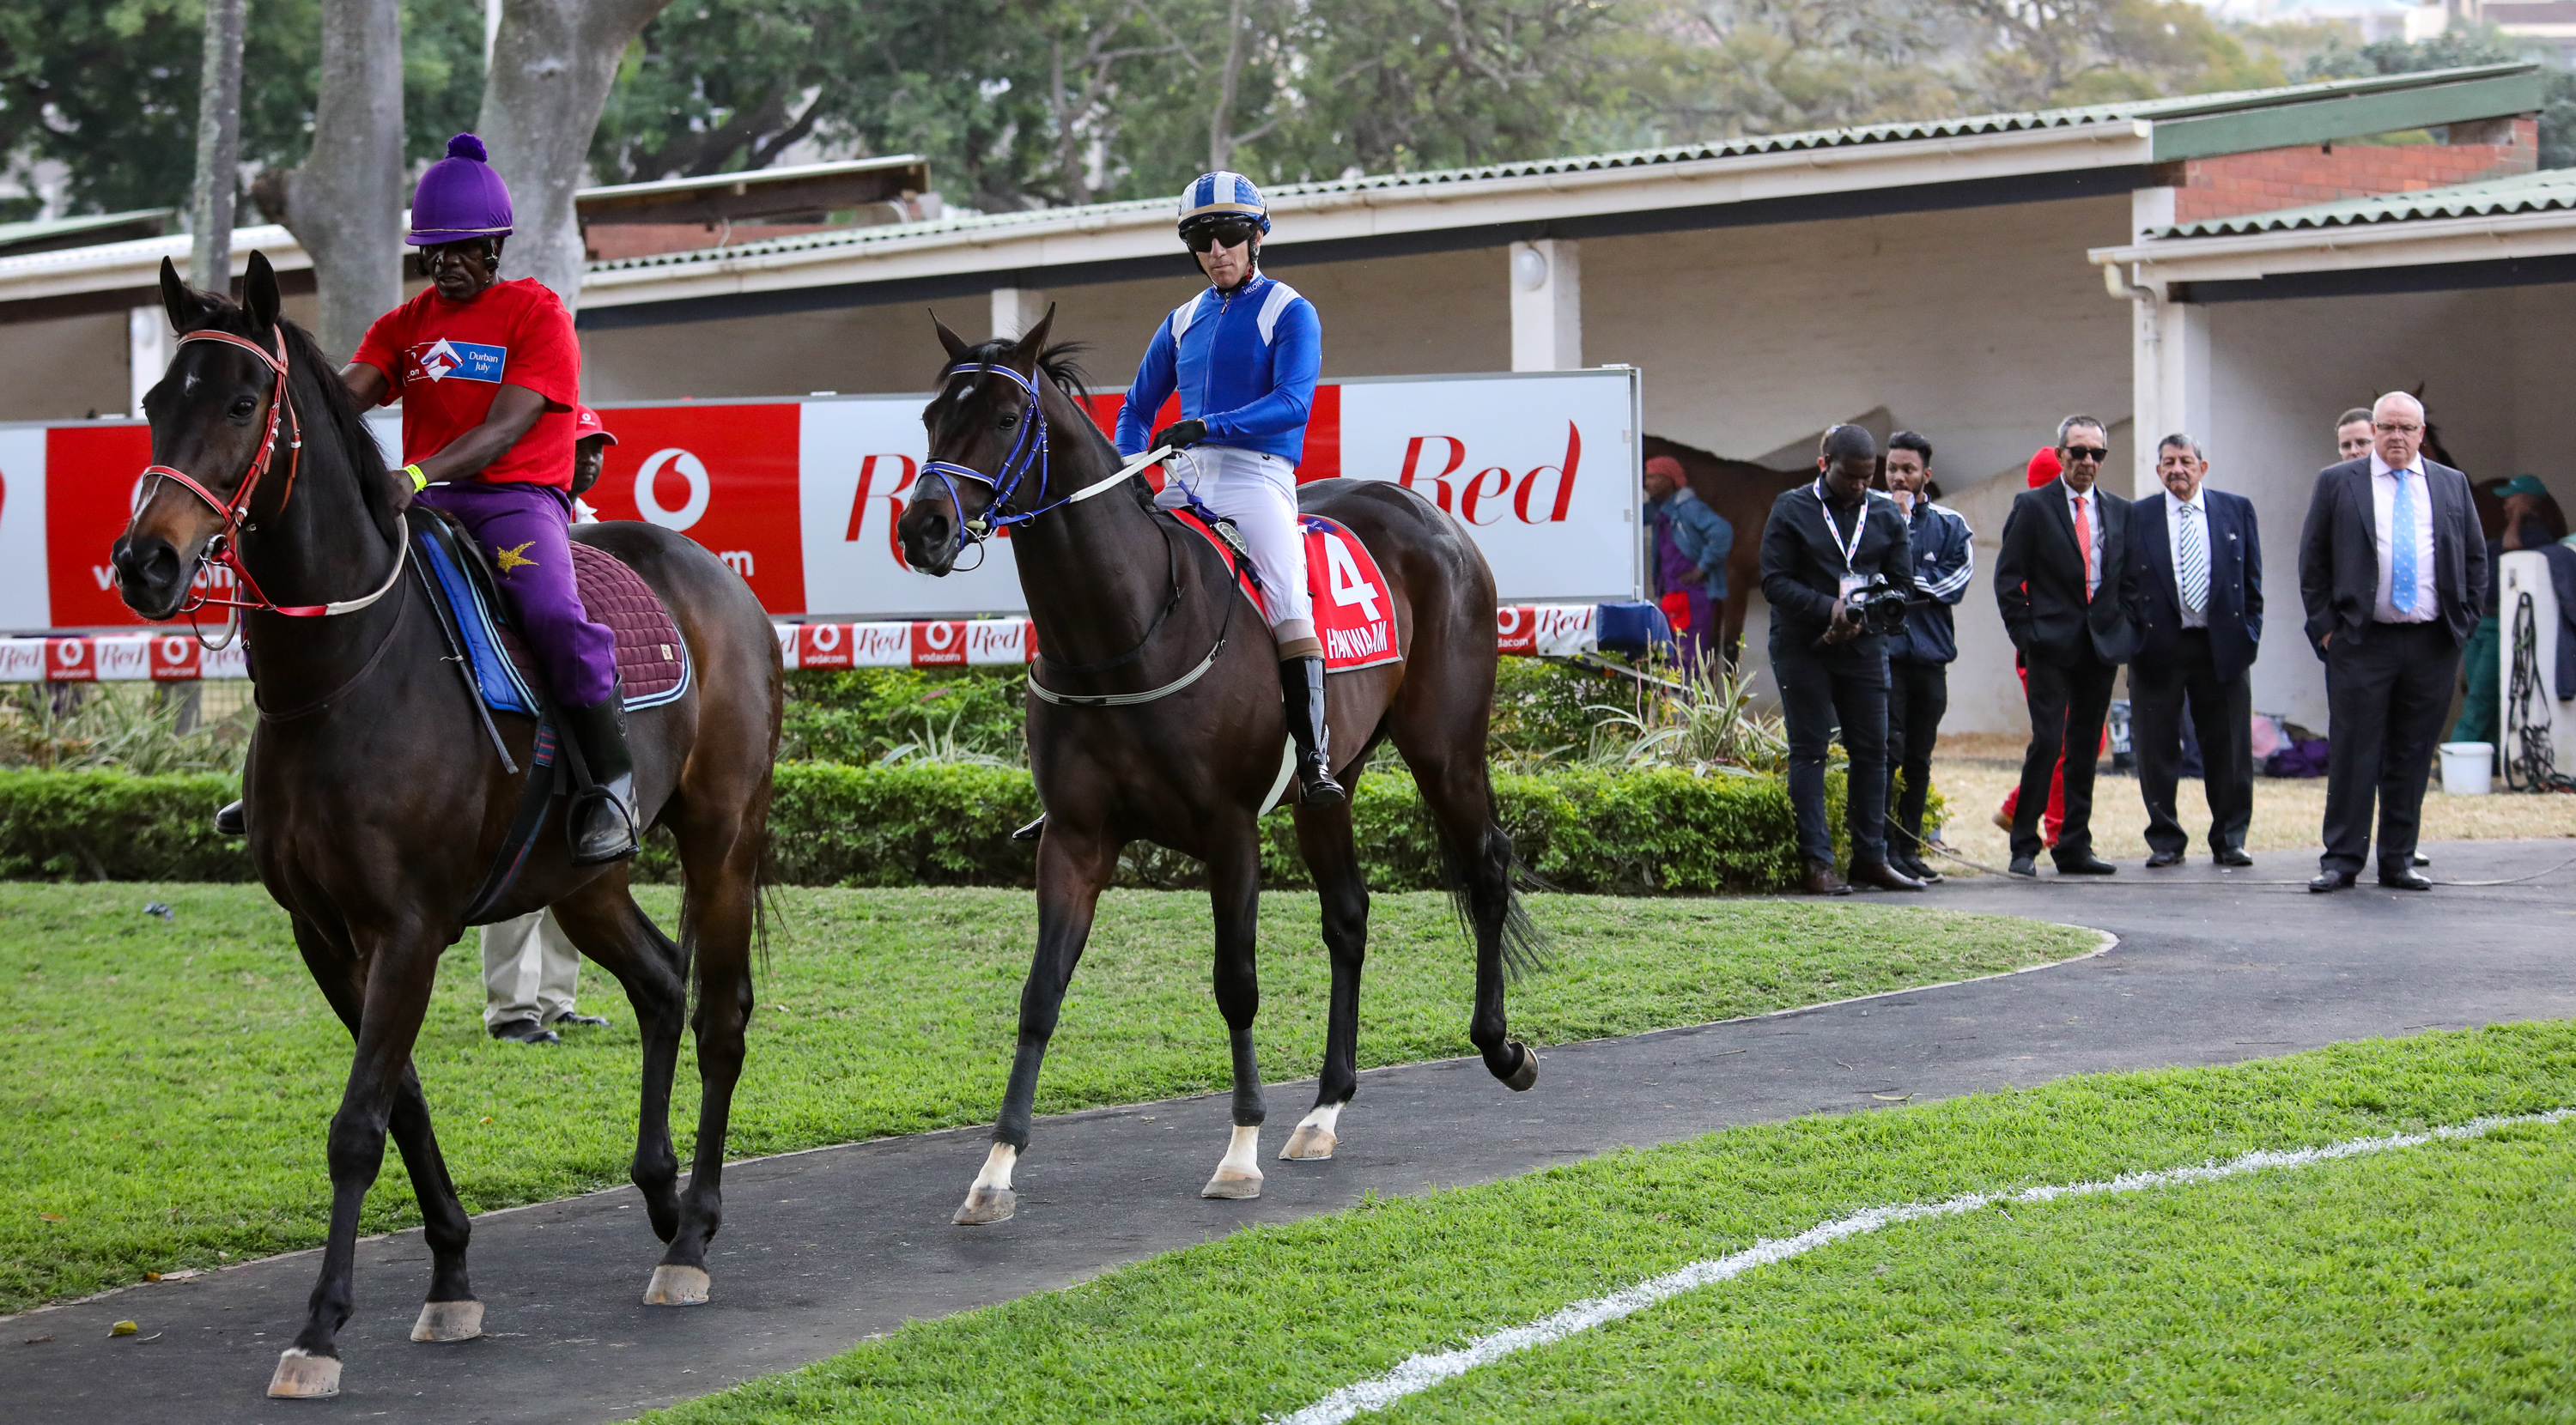 Hawwaam in the #VDJ2019 Parade ring. Whilst he never made the race, he is a three time Gr1 winner. Image: Candiese Marnewick